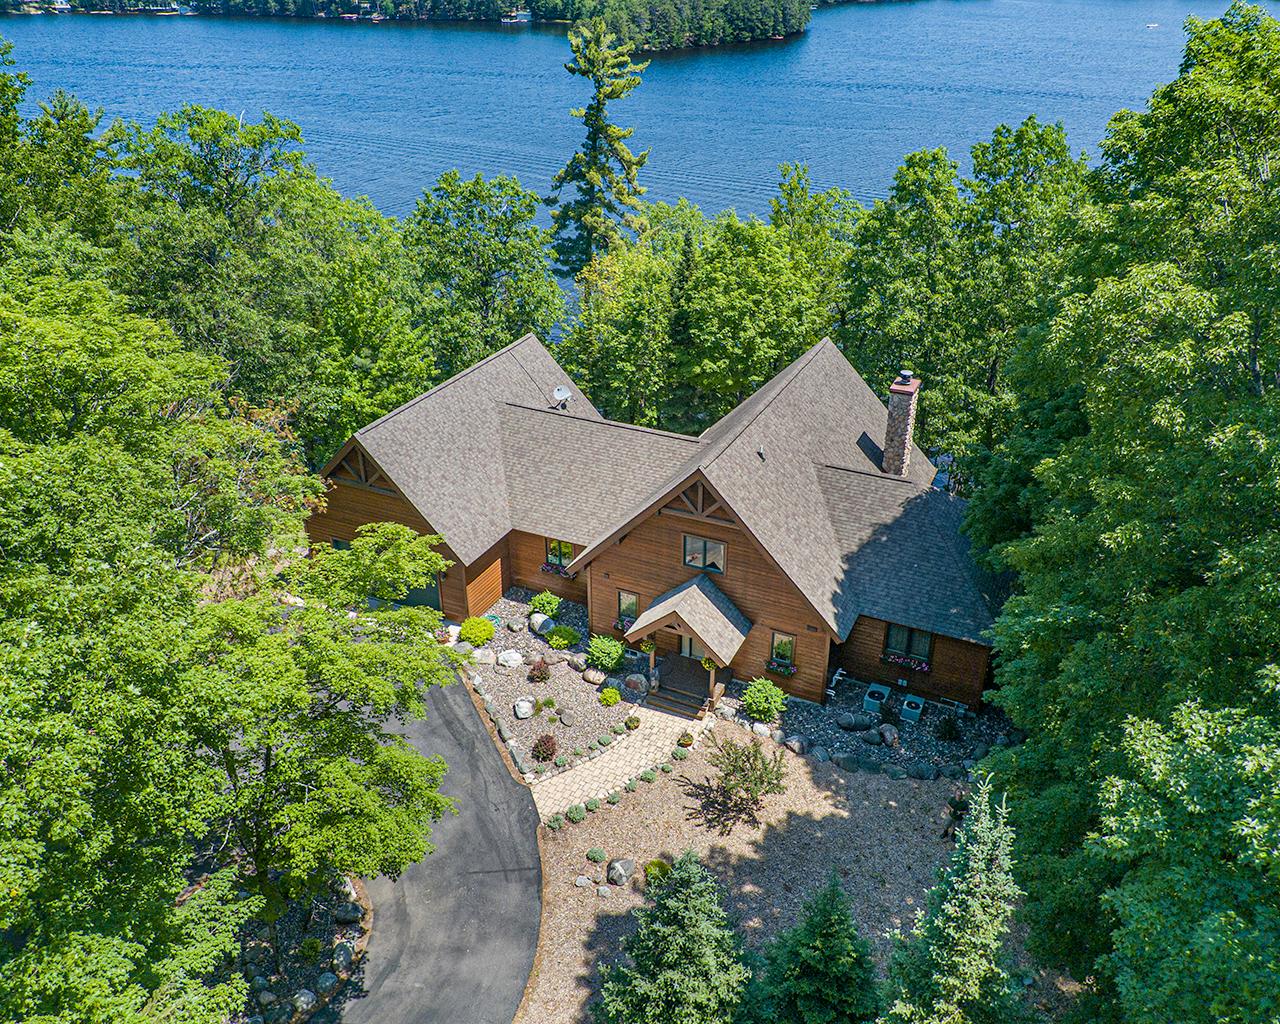 THREE LAKES CHAIN DREAM-Lovely custom cedar home w/225’ of private sand frontage & INCREDIBLE lake views! This spacious home is centrally located on the highly sought after 3-Lks/Eagle River Chain of 28 Lakes & between Three Lakes & Eagle River. Features; soaring wood ceilings, hickory flooring, a beautiful floor to ceiling FP, lakeside wall of windows. Open kitchen/dining area w/hickory cabinetry, SS appliances & peninsula snack bar, main floor primary BR suite w/lakeside deck & Jacuzzi tub. Plenty of room for friends & family in the loft BR suite & finished walkout LL w/large family room that leads to a fabulous stone patio & firepit area. Guests will gather in the convenient screen porch that leads to extensive lakeside decking. Easy access off newly paved roads & close to a boat landing, there’s a circular blacktop drive, an attached insulated garage, dry boathouse at water’s edge & maintenance-free pier. This property delivers the Northwood’s lifestyle you’ve been dreaming of! Buyer to Verify All Measurements